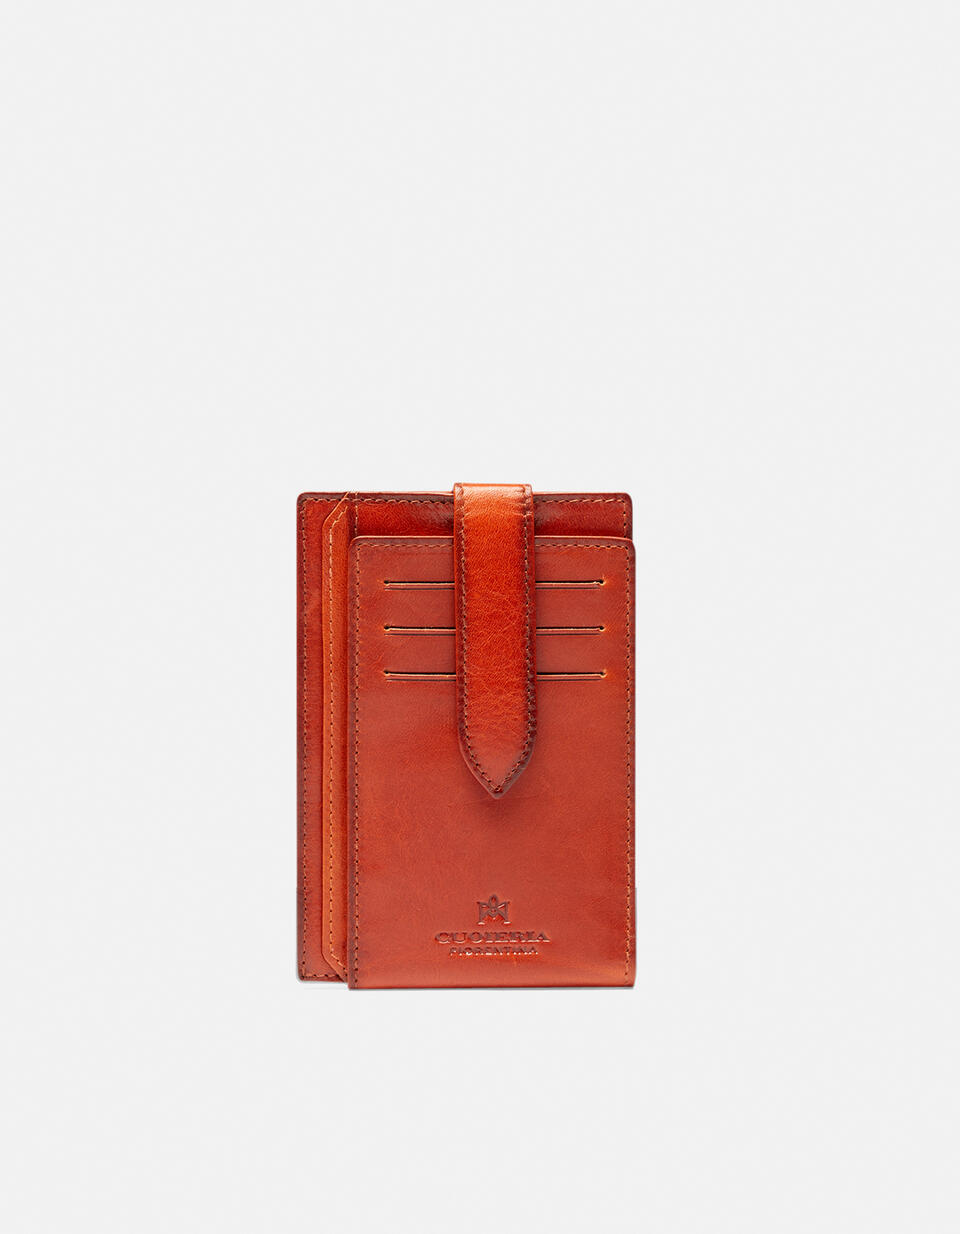 Warm and Color Anti-RFID cardholder - Women's Wallets - Men's Wallets | Wallets ARANCIO - Women's Wallets - Men's Wallets | WalletsCuoieria Fiorentina